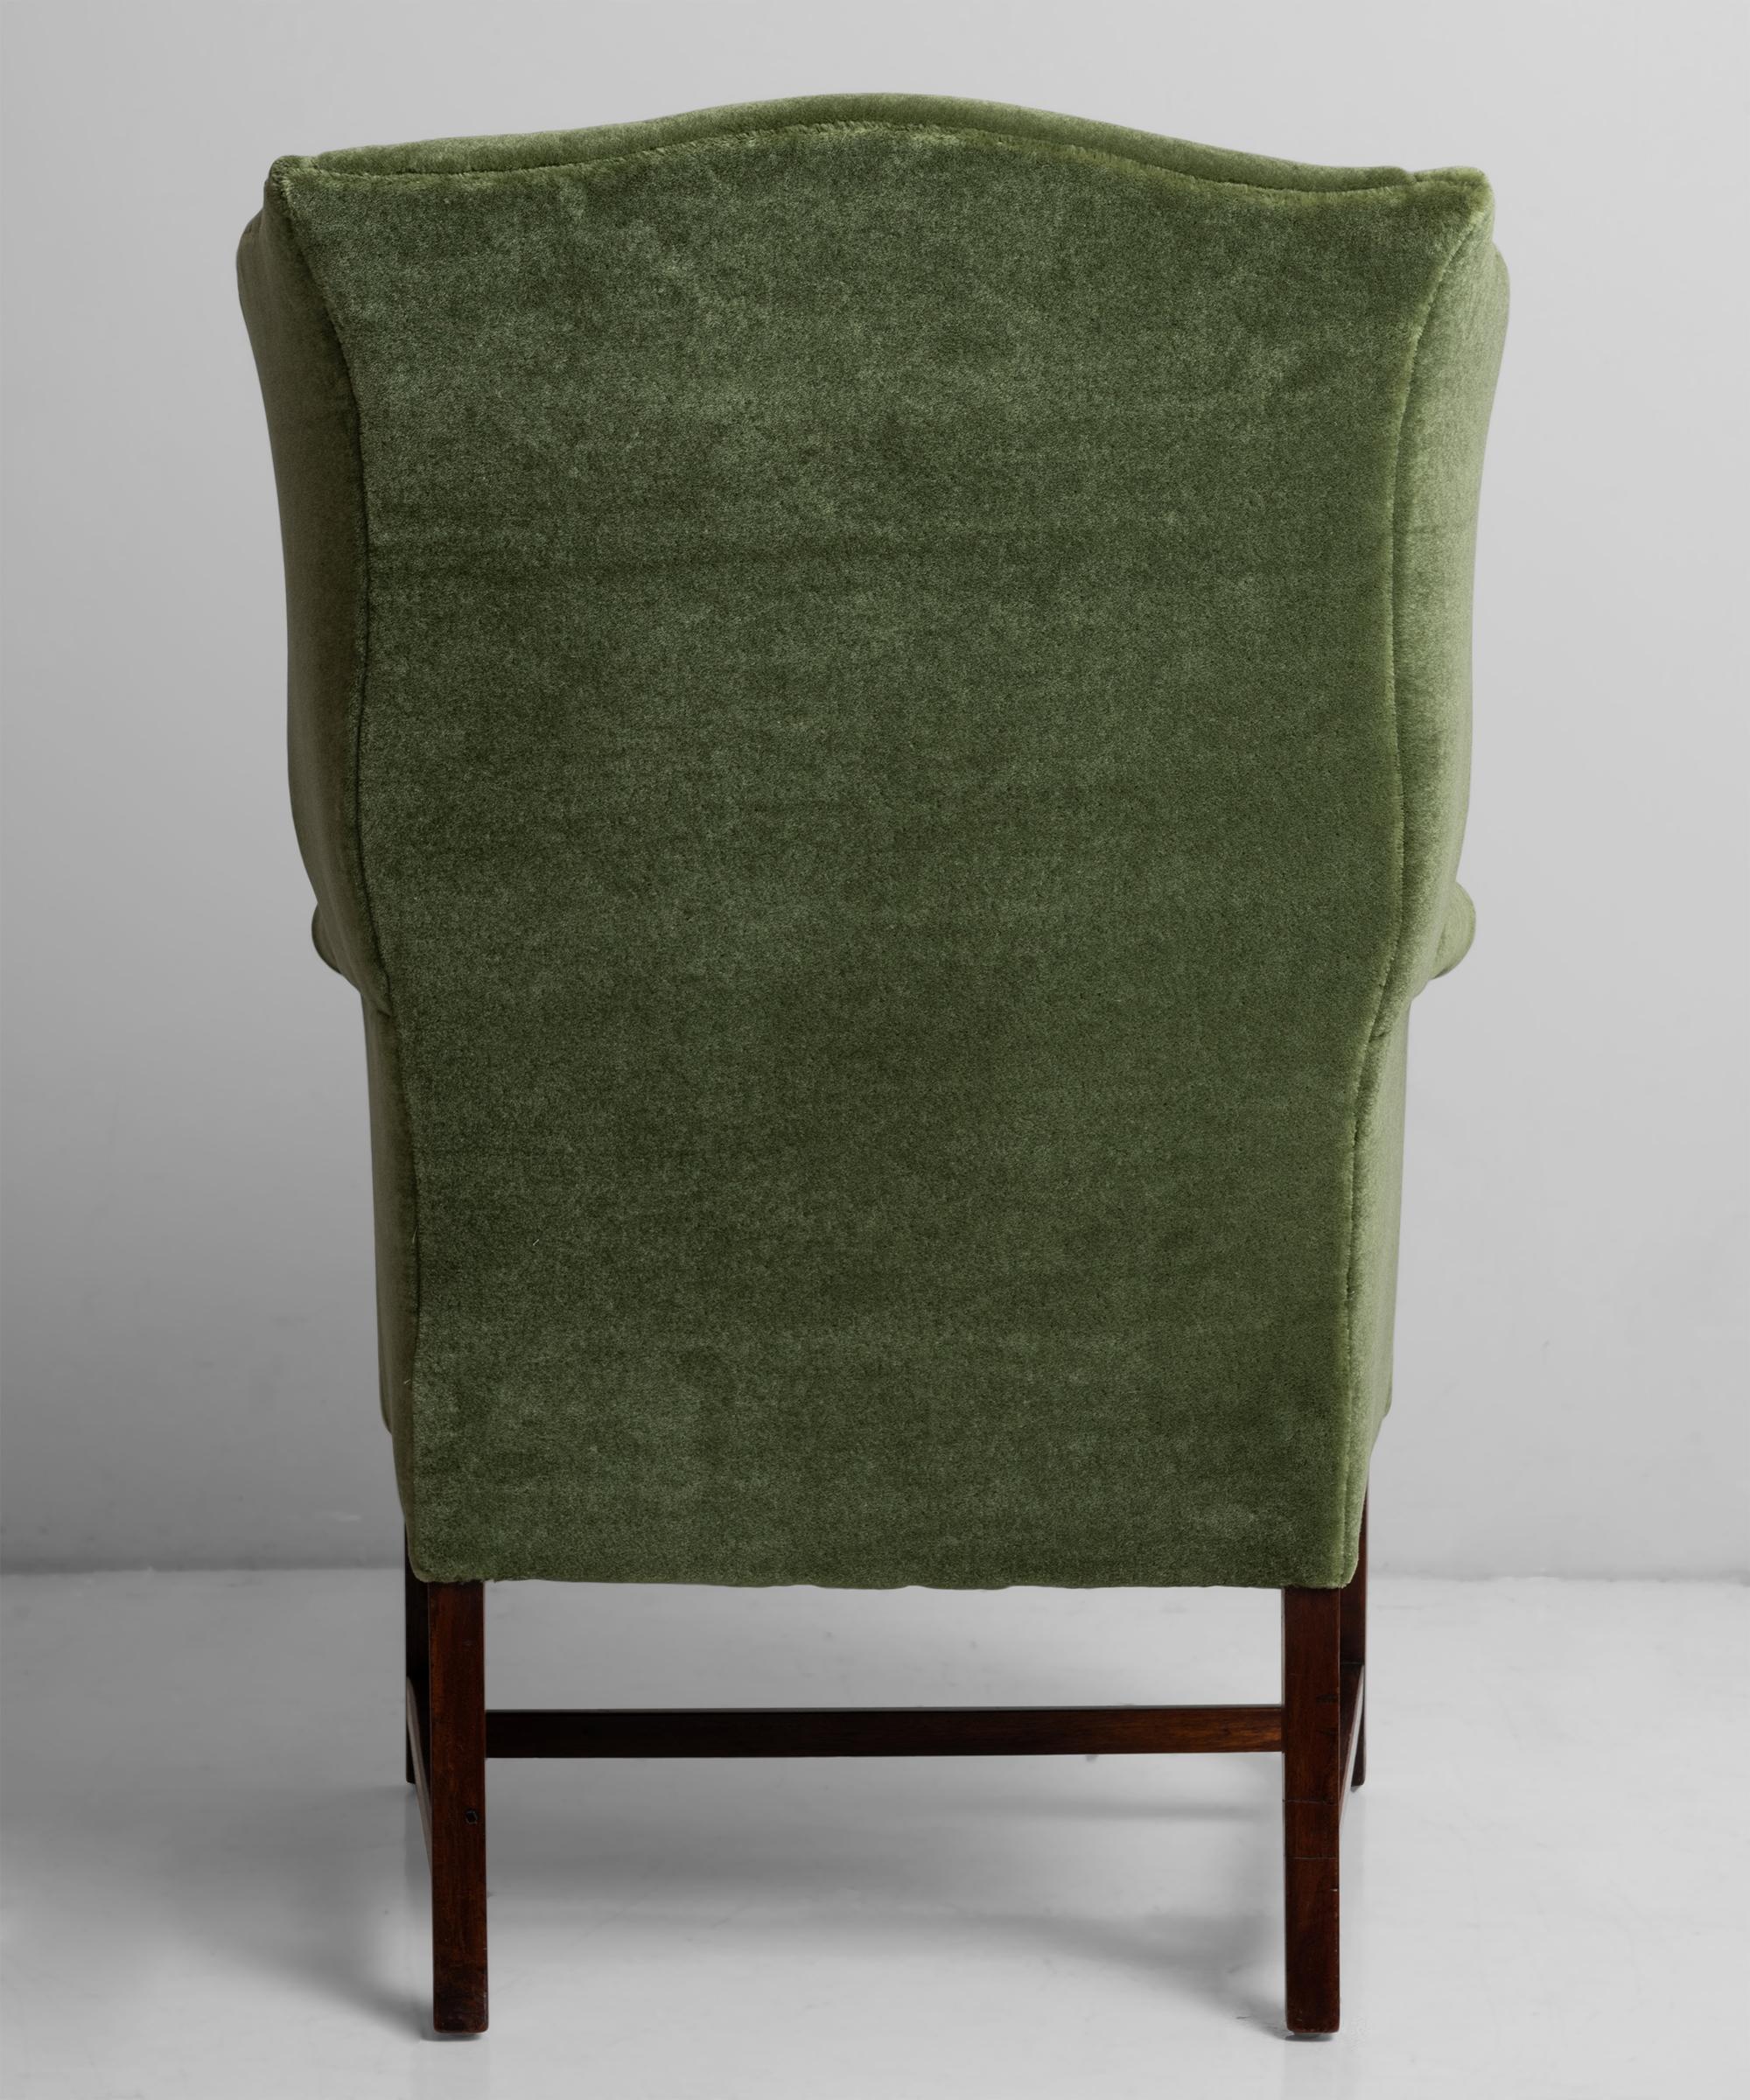 English Wingchair in Teddy Mohair by Pierre Frey 'Mousse', England, circa, 1880